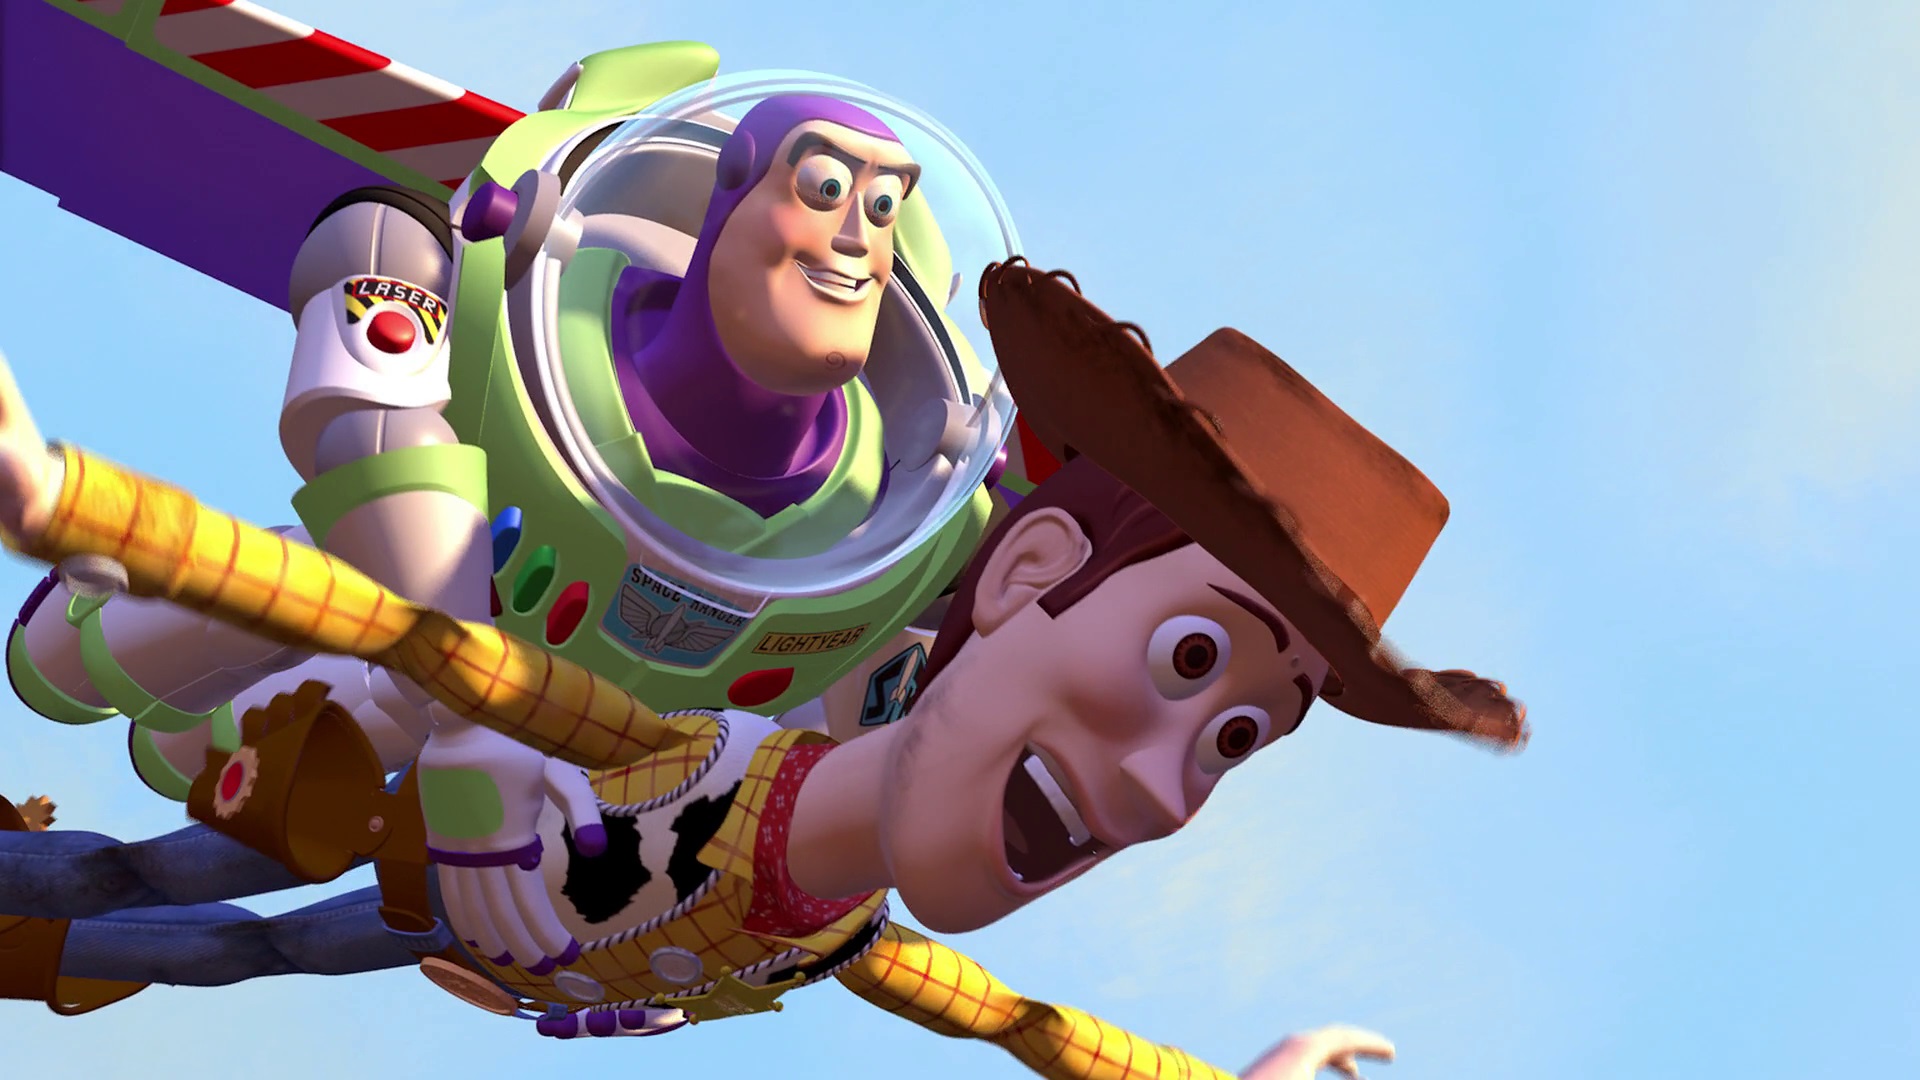 http://static2.wikia.nocookie.net/__cb20110917220828/pixar/images/4/4f/ToyStory-To-Infinity-and-Beyond%21.jpg